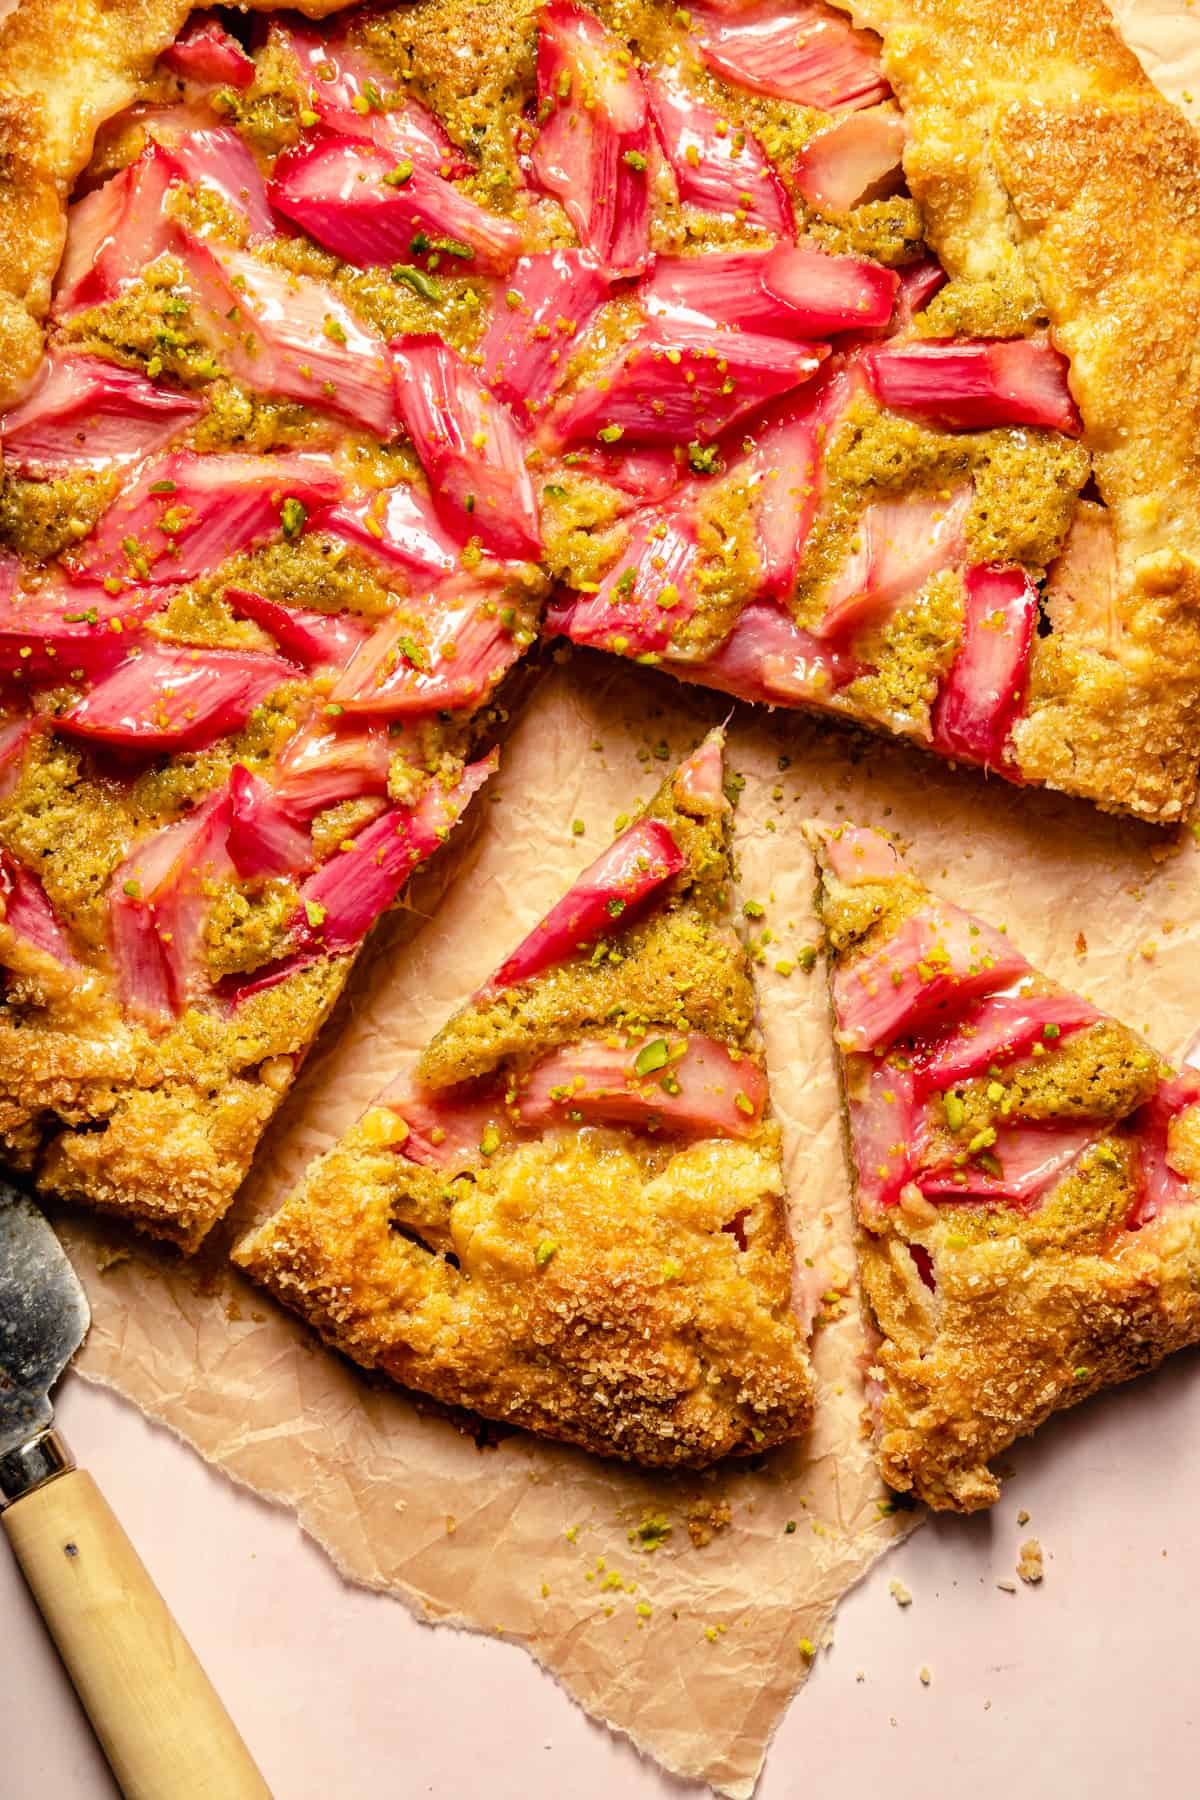 Rhubarb galette cut into wedges on brown parchment paper.